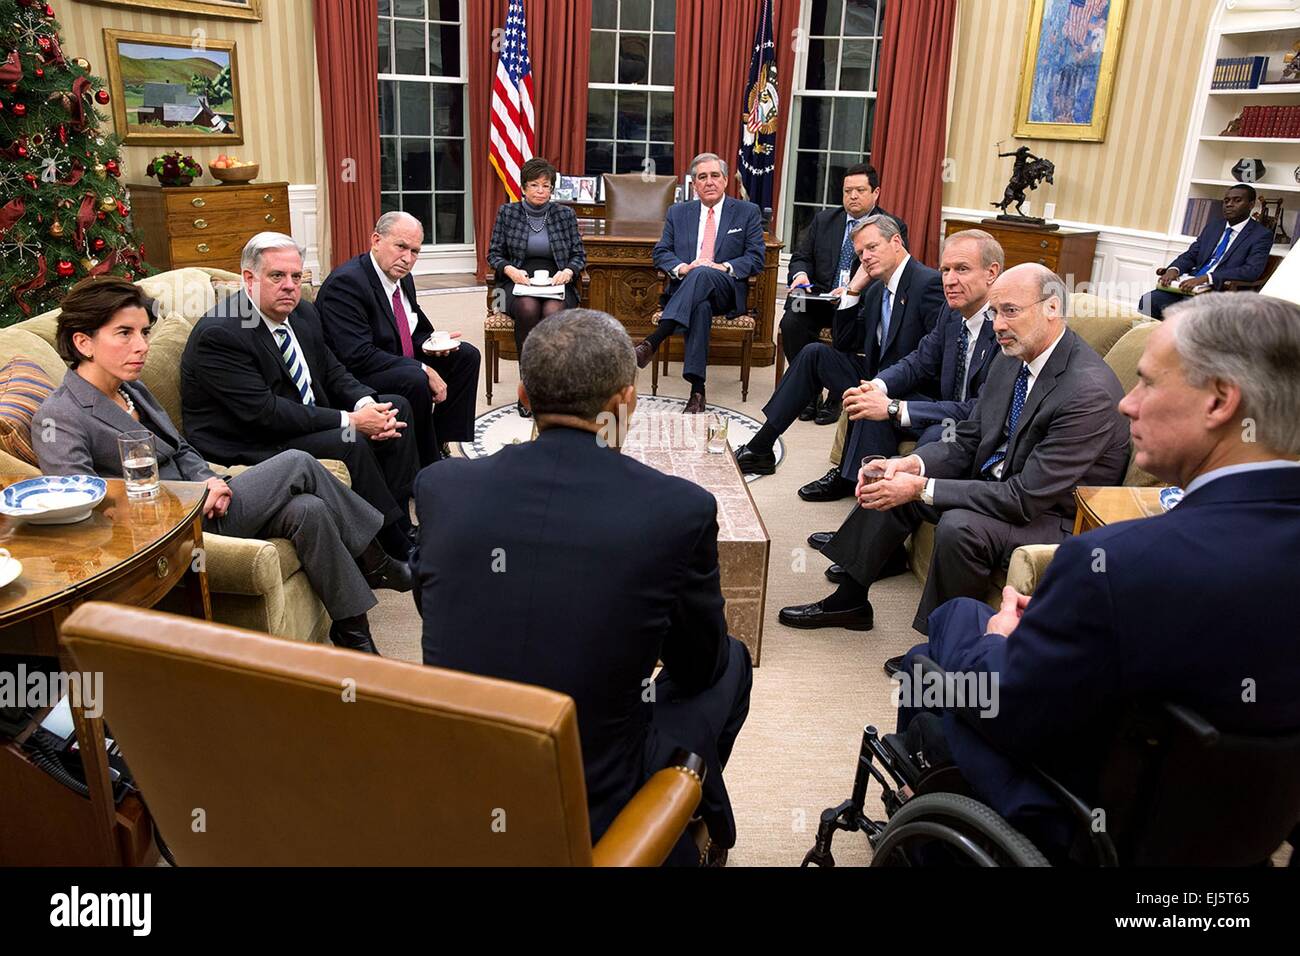 US President Barack Obama meets with newly elected governors in the Oval Office of the White House December 5, 2014 in Washington, DC. From left are Rhode Island Governor Gina Raimondo, Maryland Governor Larry Hogan, Alaska Governor Bill Walker, Senior Advisor Valerie Jarrett, Jerry Abramson, Director of Intergovernmental Affairs, Adrian Saenz, Deputy Director of Intergovernmental Affairs, Massachusetts Governor Charlie Baker, Illinois Governor Bruce Rauner, Pennsylvania Governor Tom Wolf and Texas Governor Greg Abbott. Stock Photo